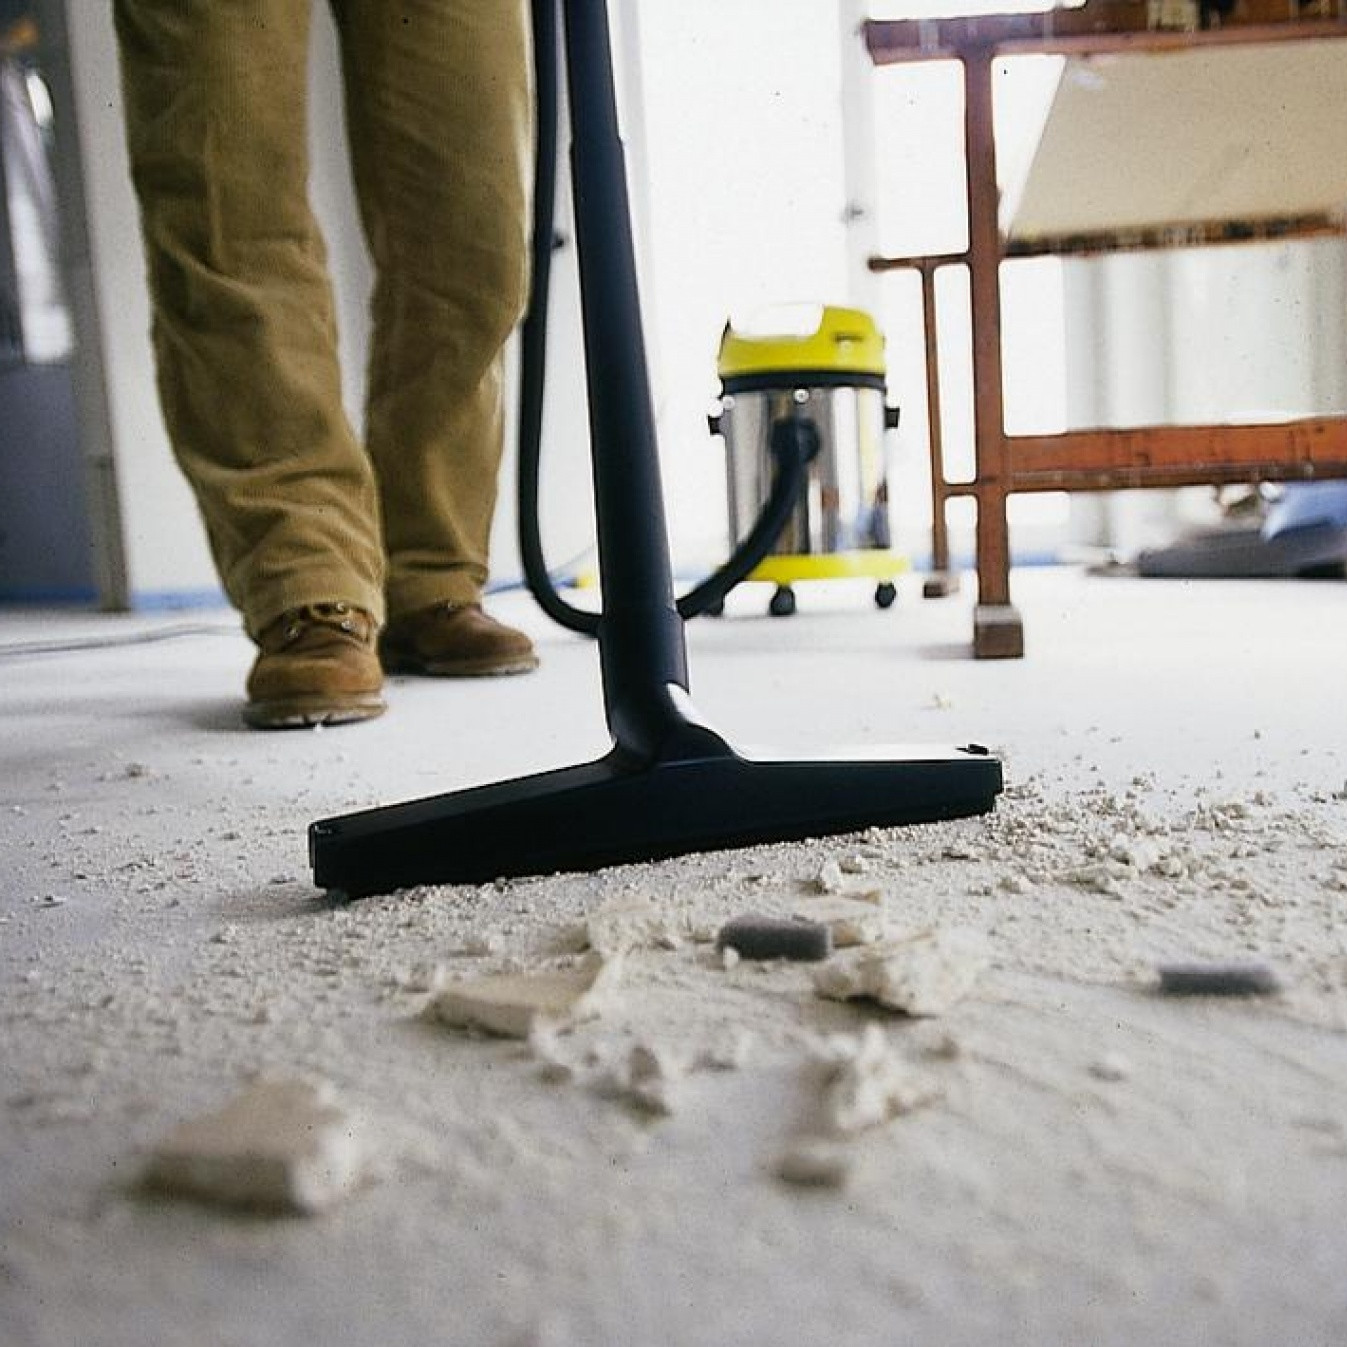 Get construction cleaning services from the industry experts